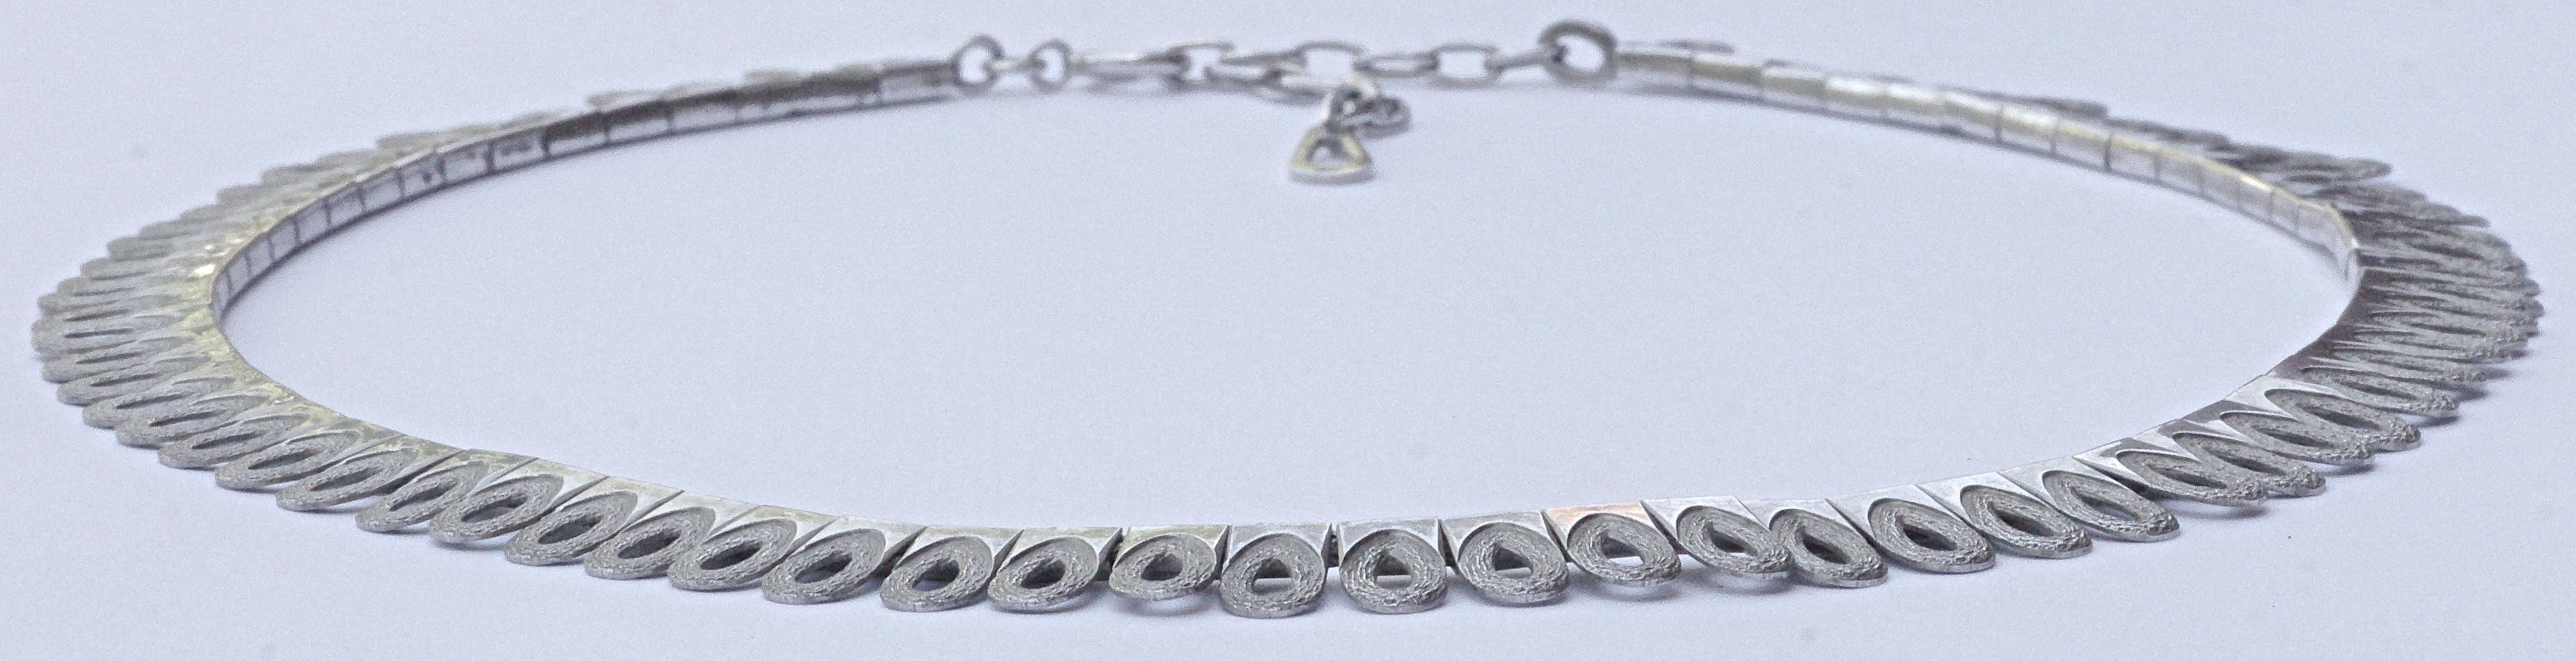 1970s Sterling Silver Shiny and Textured Oval Design Necklace, London import  2